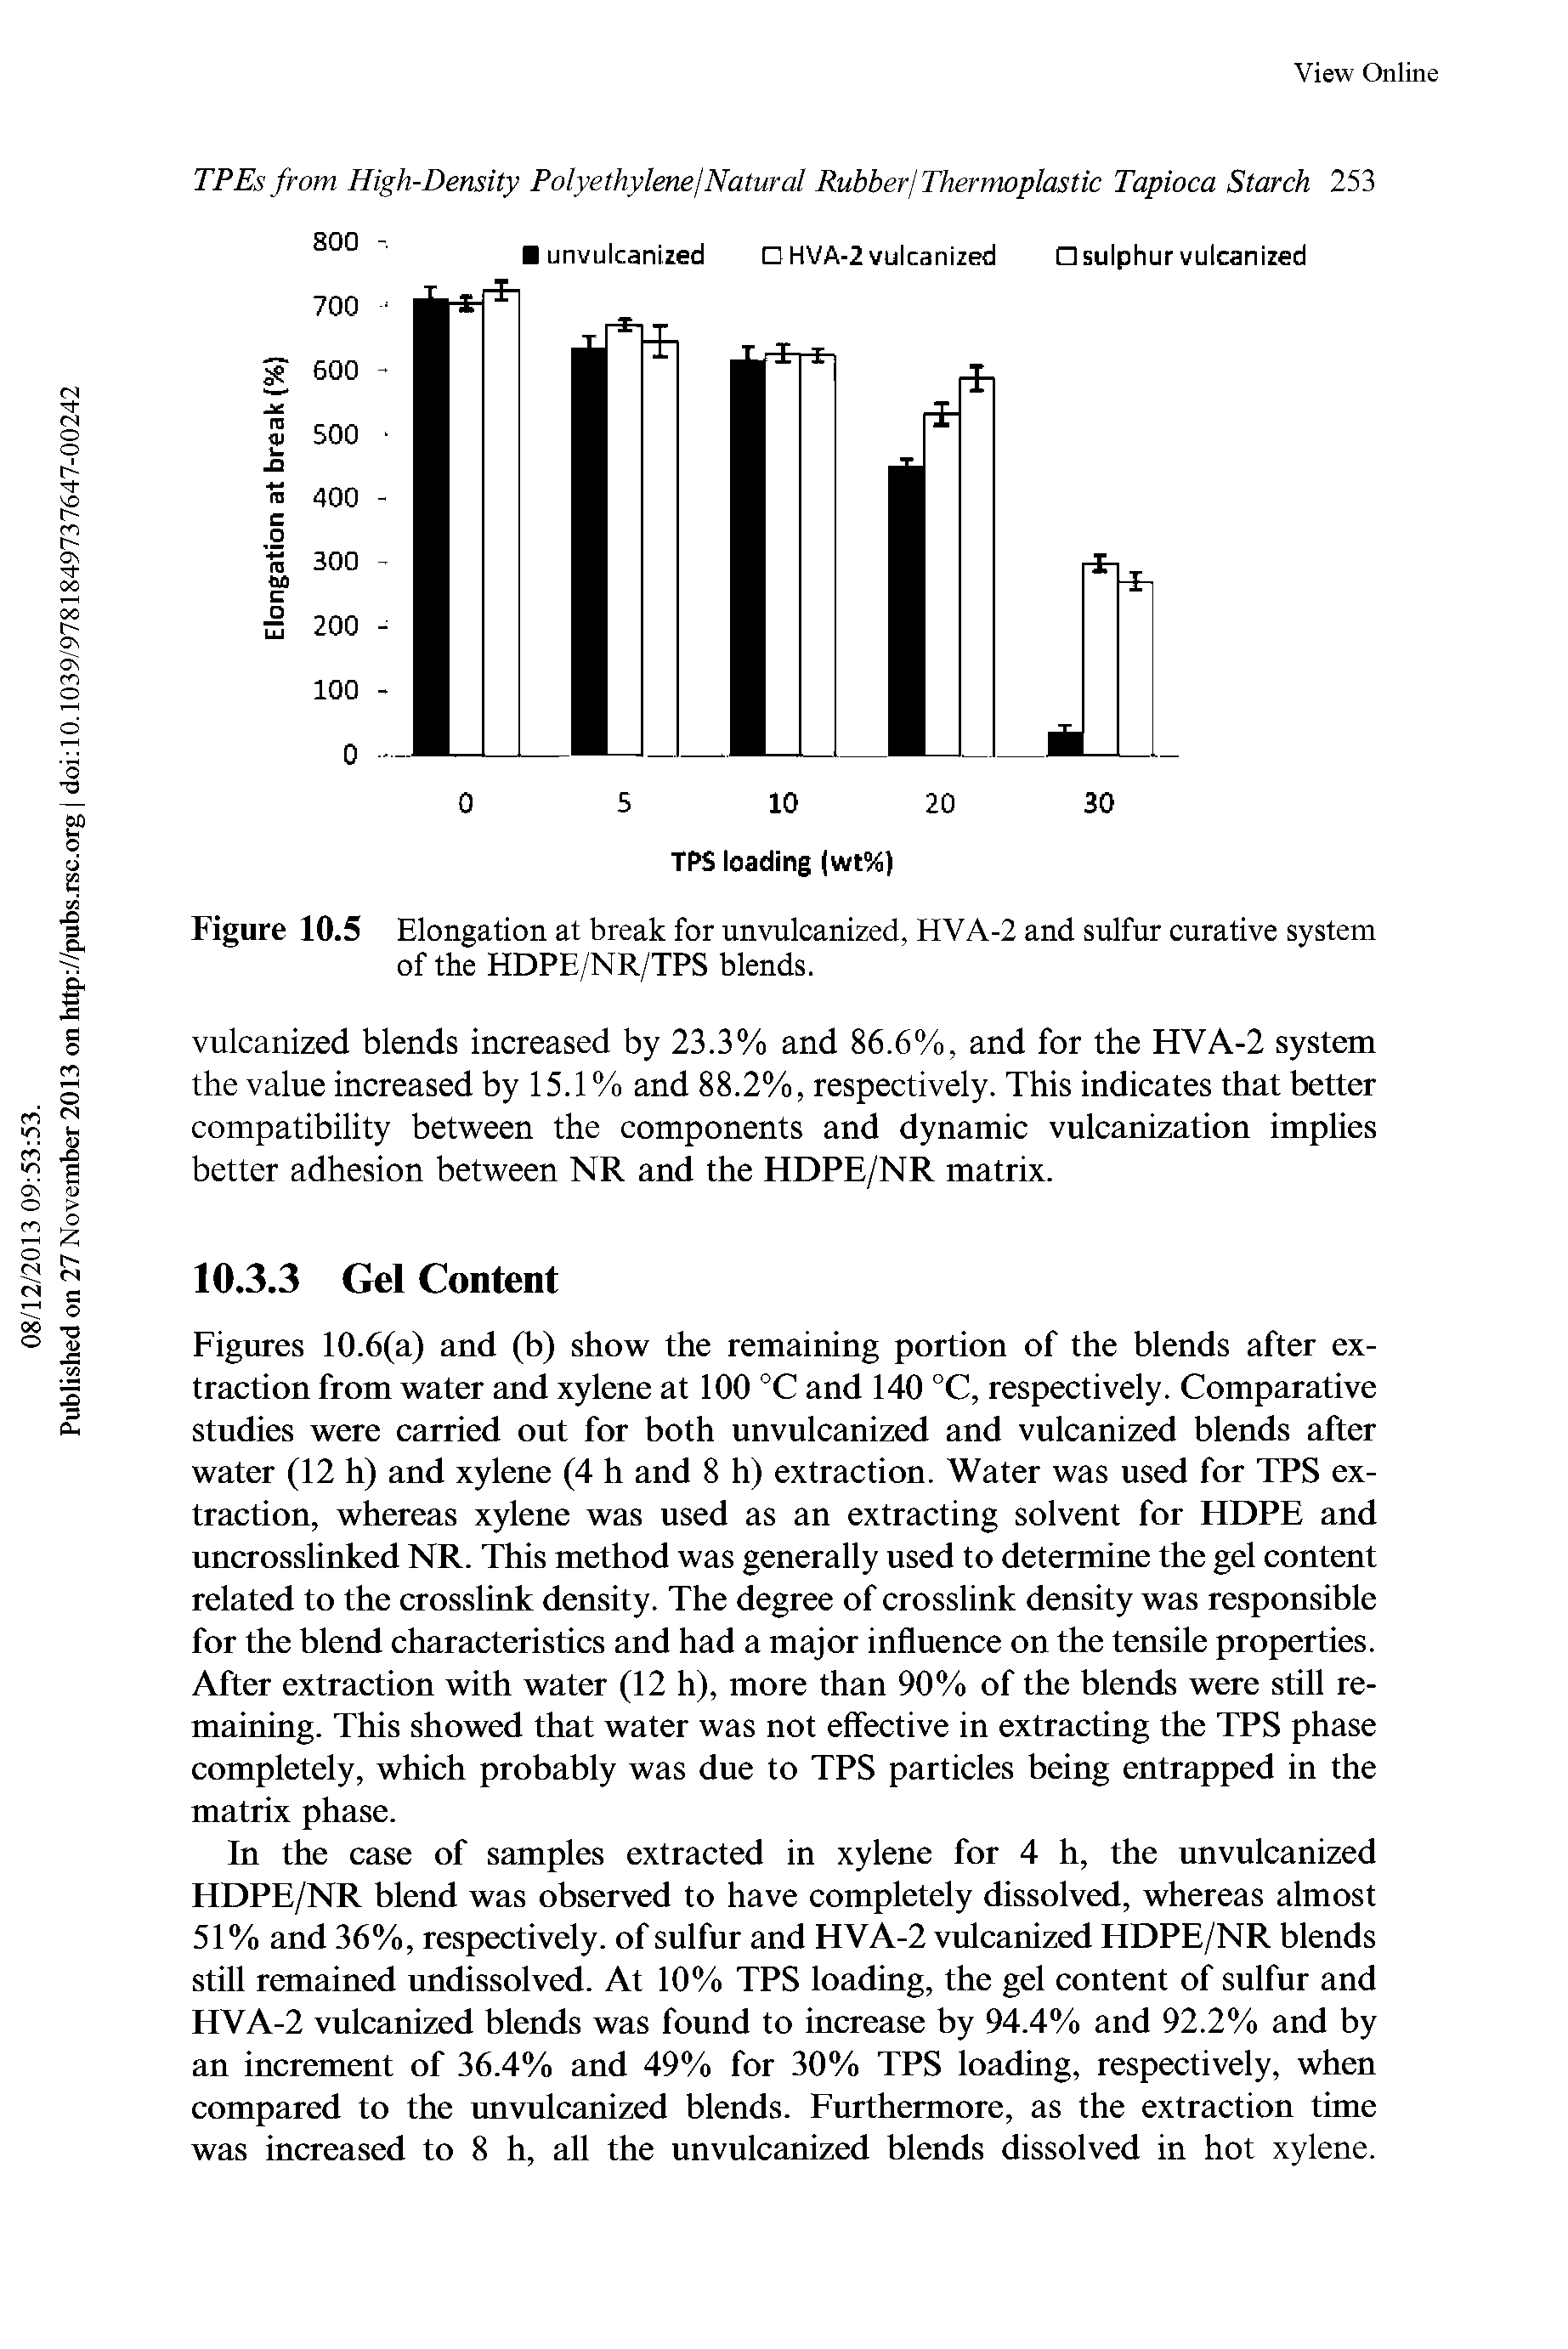 Figures 10.6(a) and (b) show the remaining portion of the blends after extraction from water and xylene at 100 °C and 140 °C, respectively. Comparative studies were carried out for both unvulcanized and vulcanized blends after water (12 h) and xylene (4 h and 8 h) extraction. Water was used for TPS extraction, whereas xylene was used as an extracting solvent for HDPE and uncrosslinked NR. This method was generally used to determine the gel content related to the crosslink density. The degree of crosslink density was responsible for the blend characteristics and had a major influence on the tensile properties. After extraction with water (12 h), more than 90% of the blends were still remaining. This showed that water was not effective in extracting the TPS phase completely, which probably was due to TPS particles being entrapped in the matrix phase.